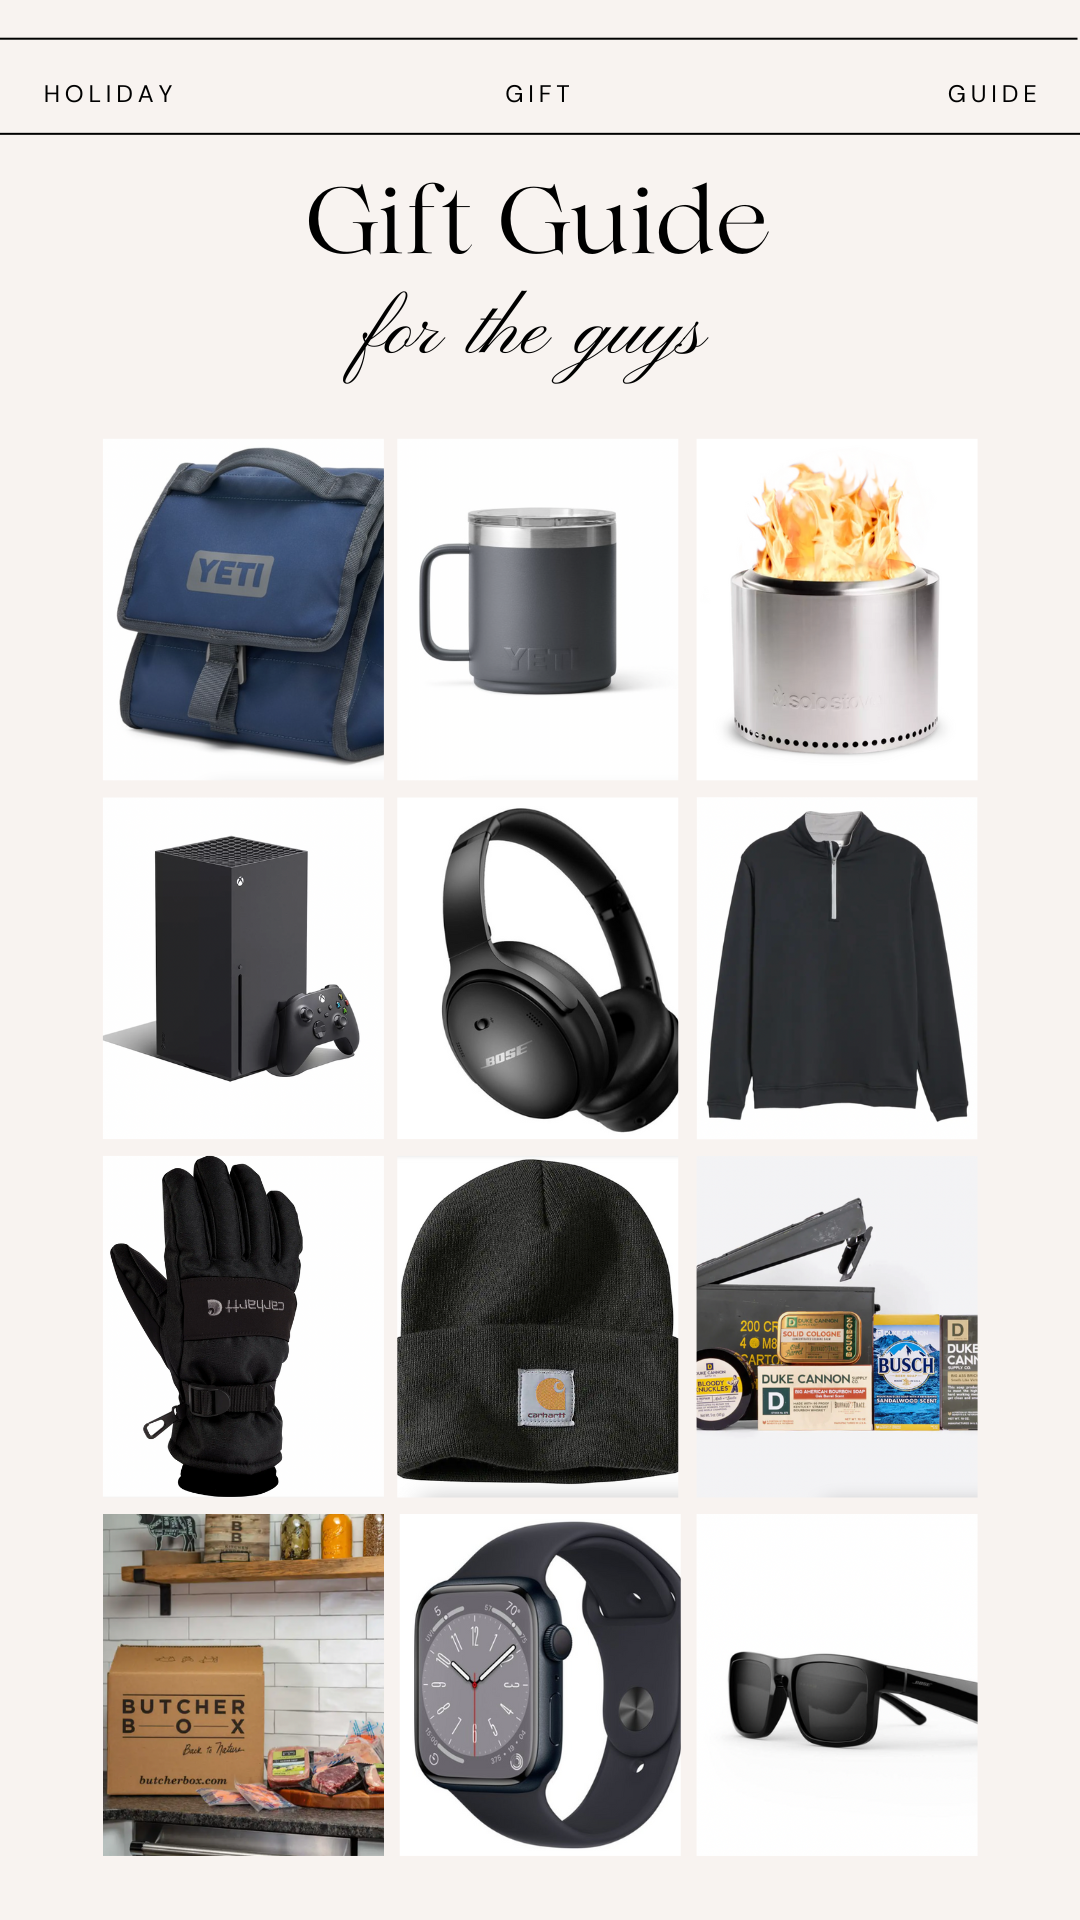 Collage of images with text "Gift Guide for the guys".